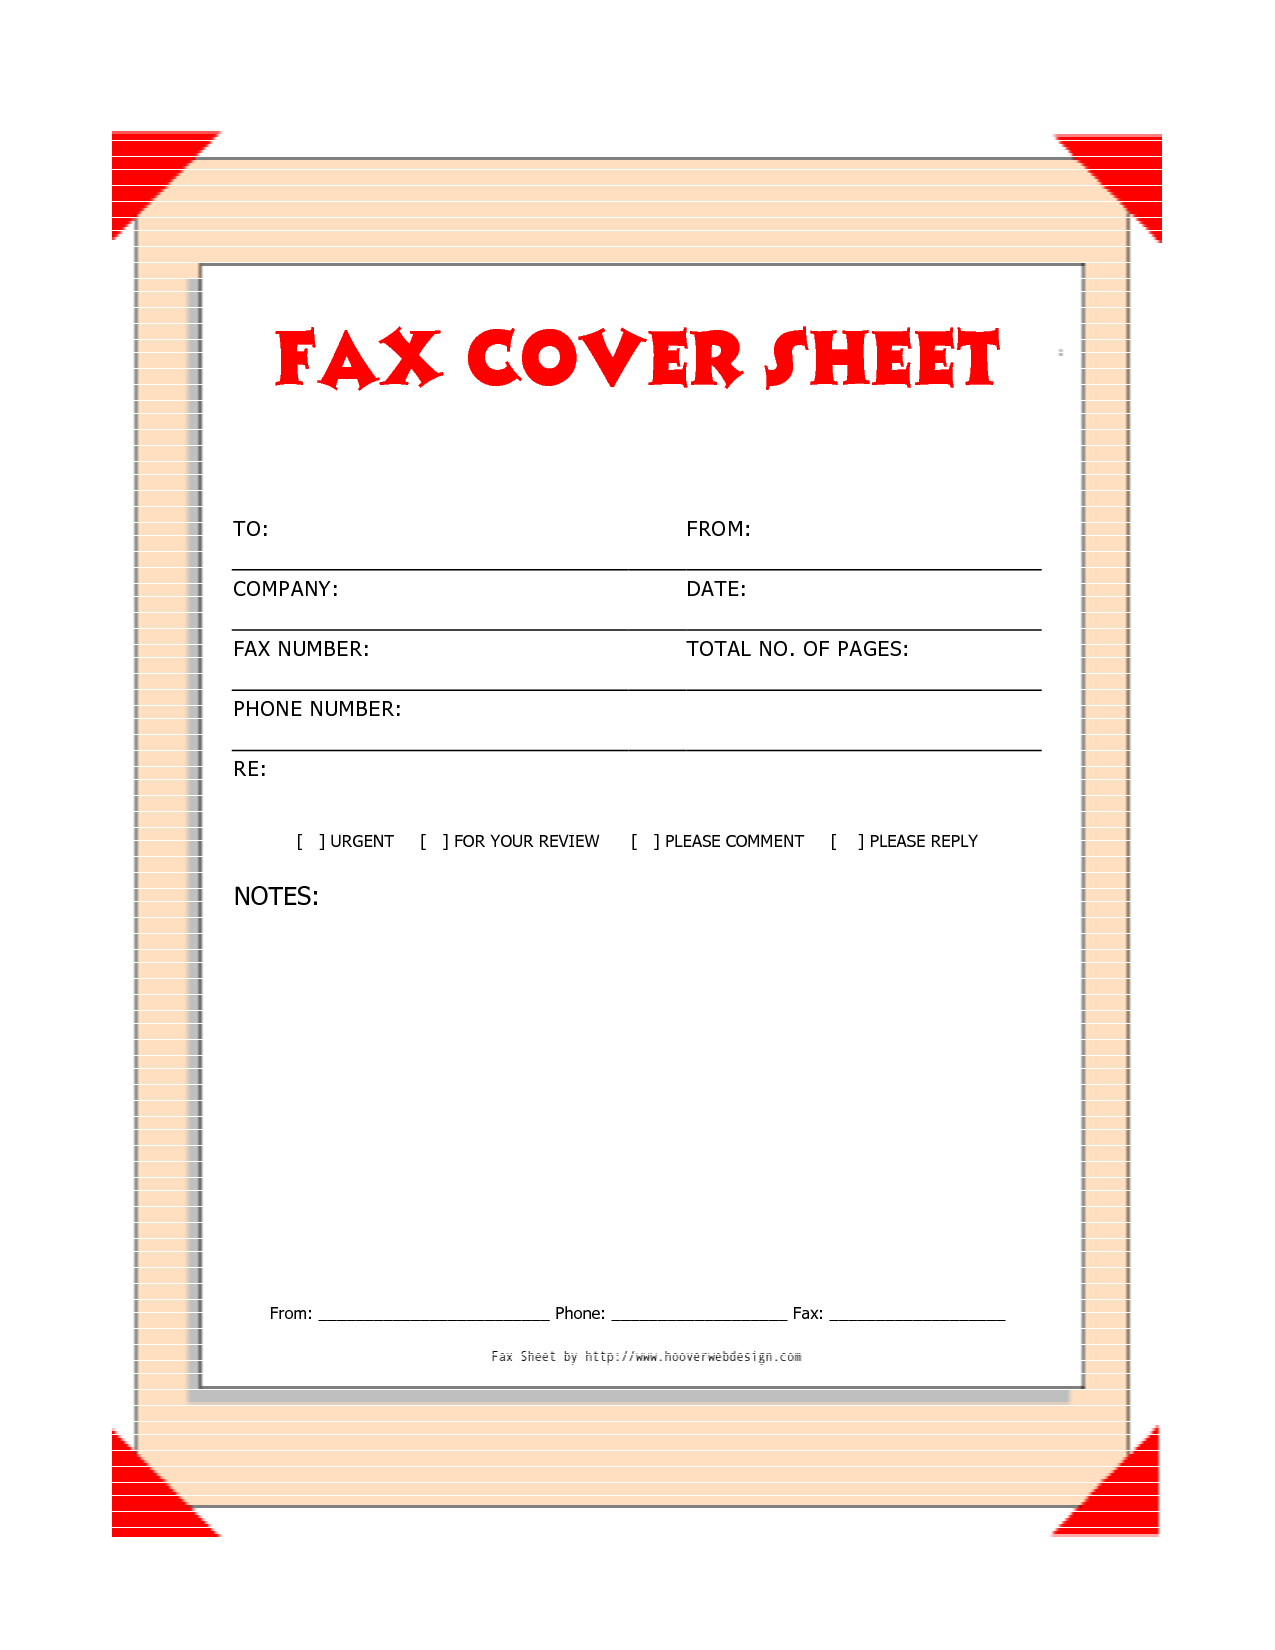 Free Printable Fax Cover Letter Template - Free Downloads Fax Covers Sheets